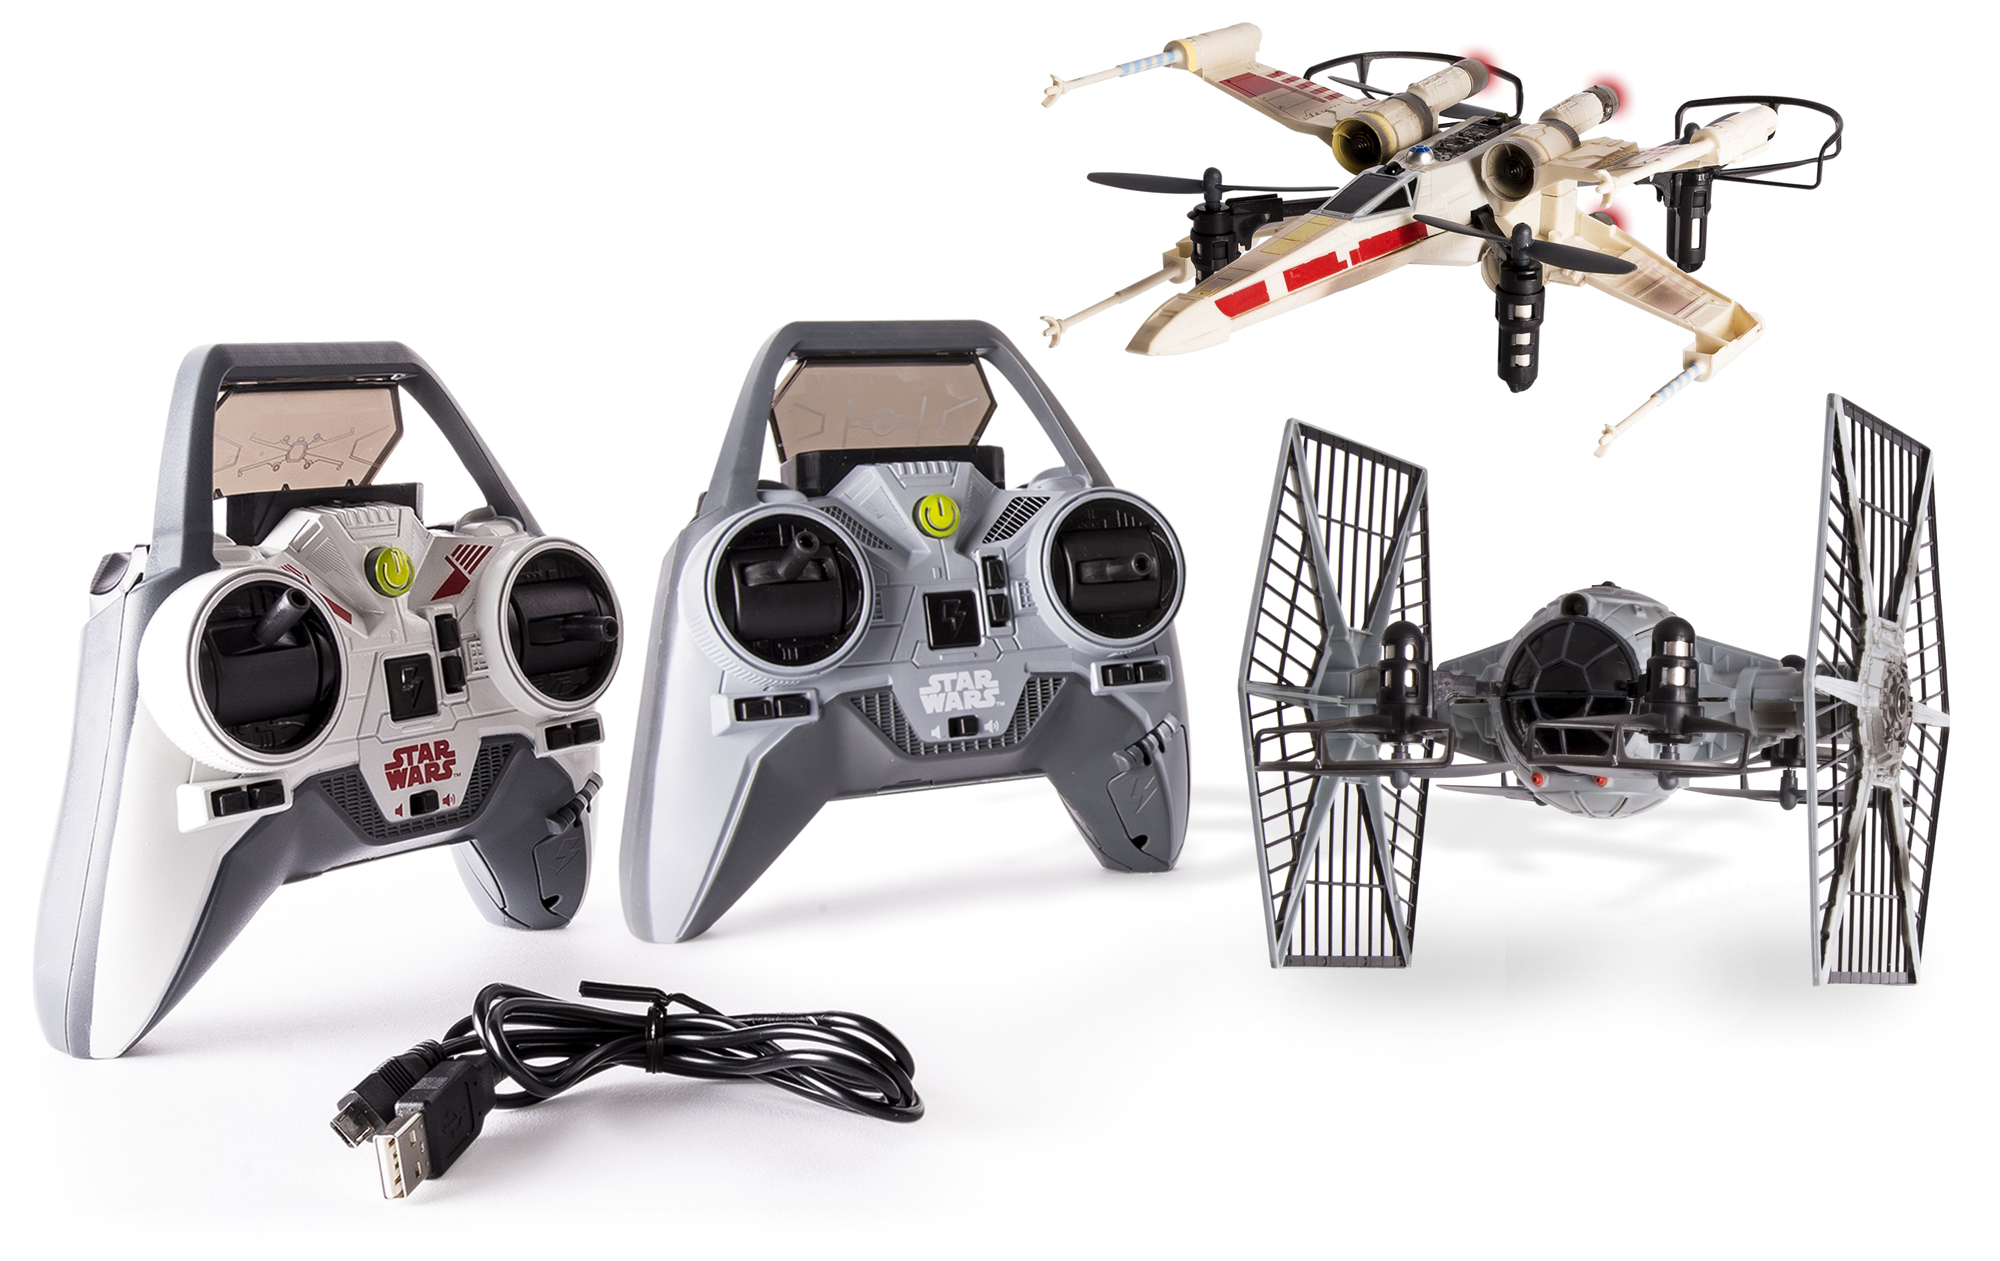 Pilot This X-Wing Drone To Shoot Down An Auto-Hovering Death Star That Fires Right Back